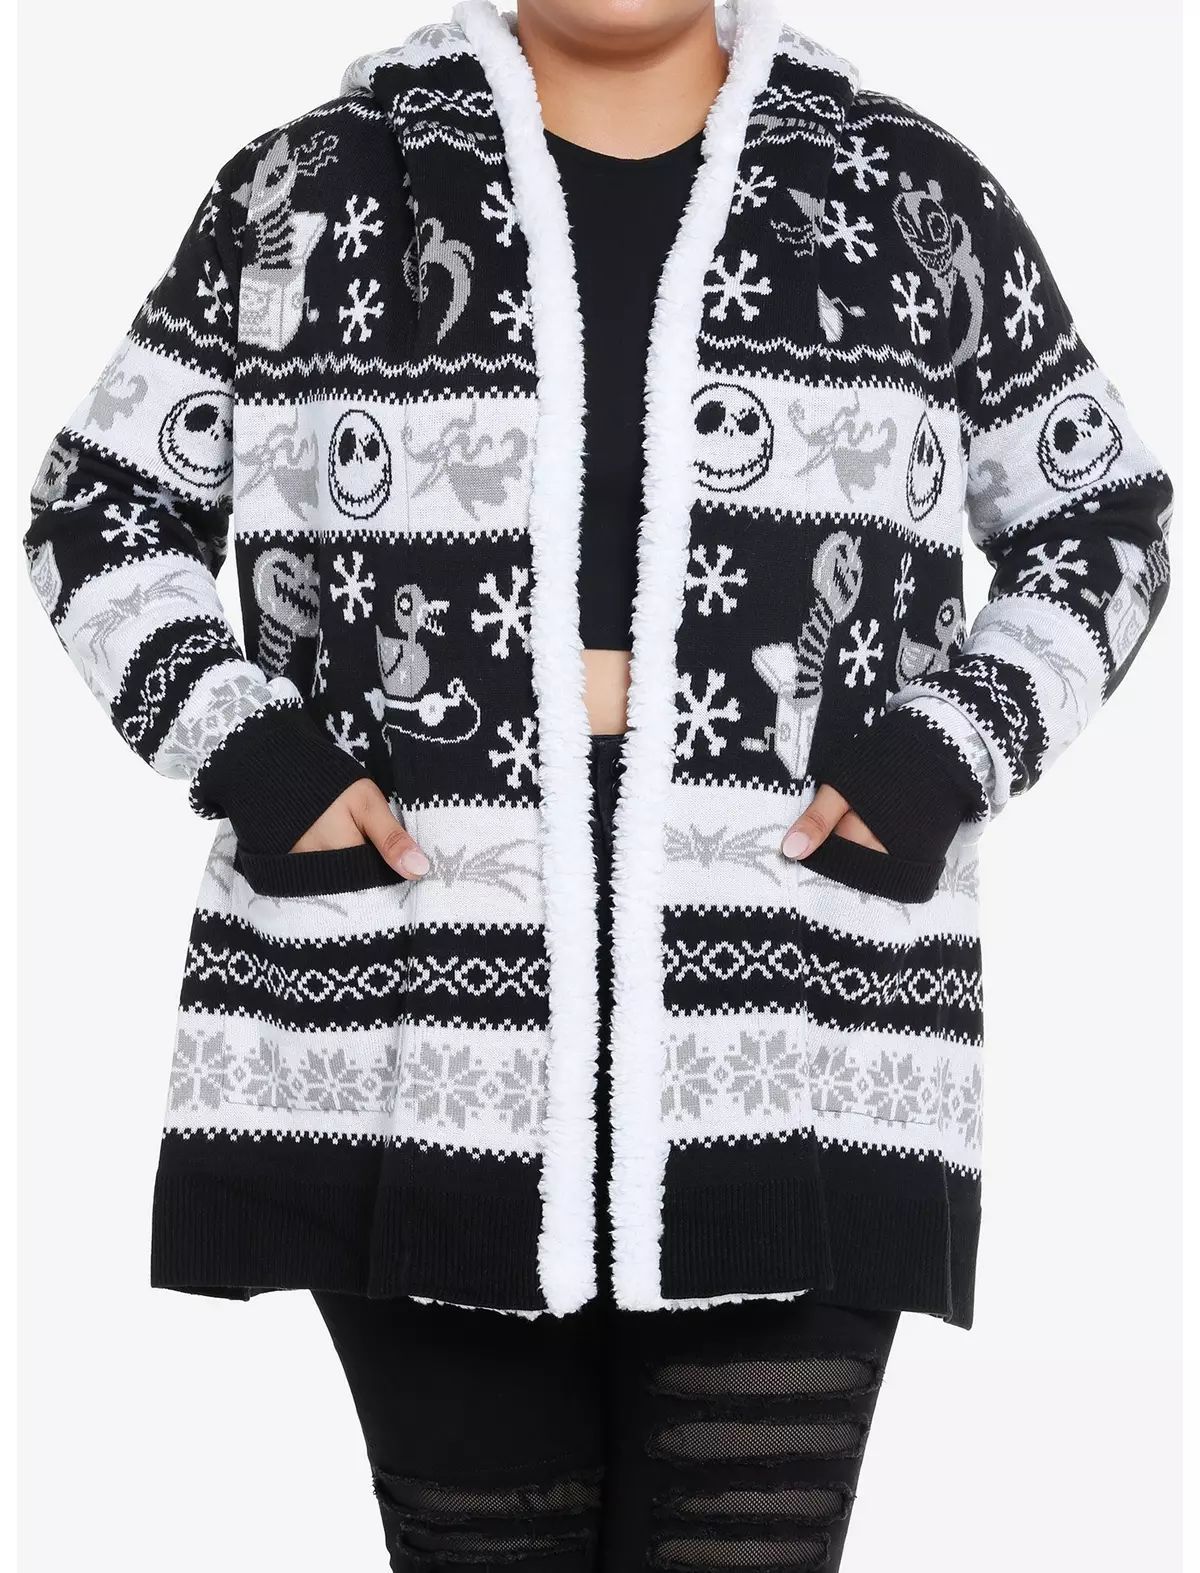 The Nightmare Before Christmas Fair Isle Sherpa Girls Open Cardigan Plus Size | Hot Topic